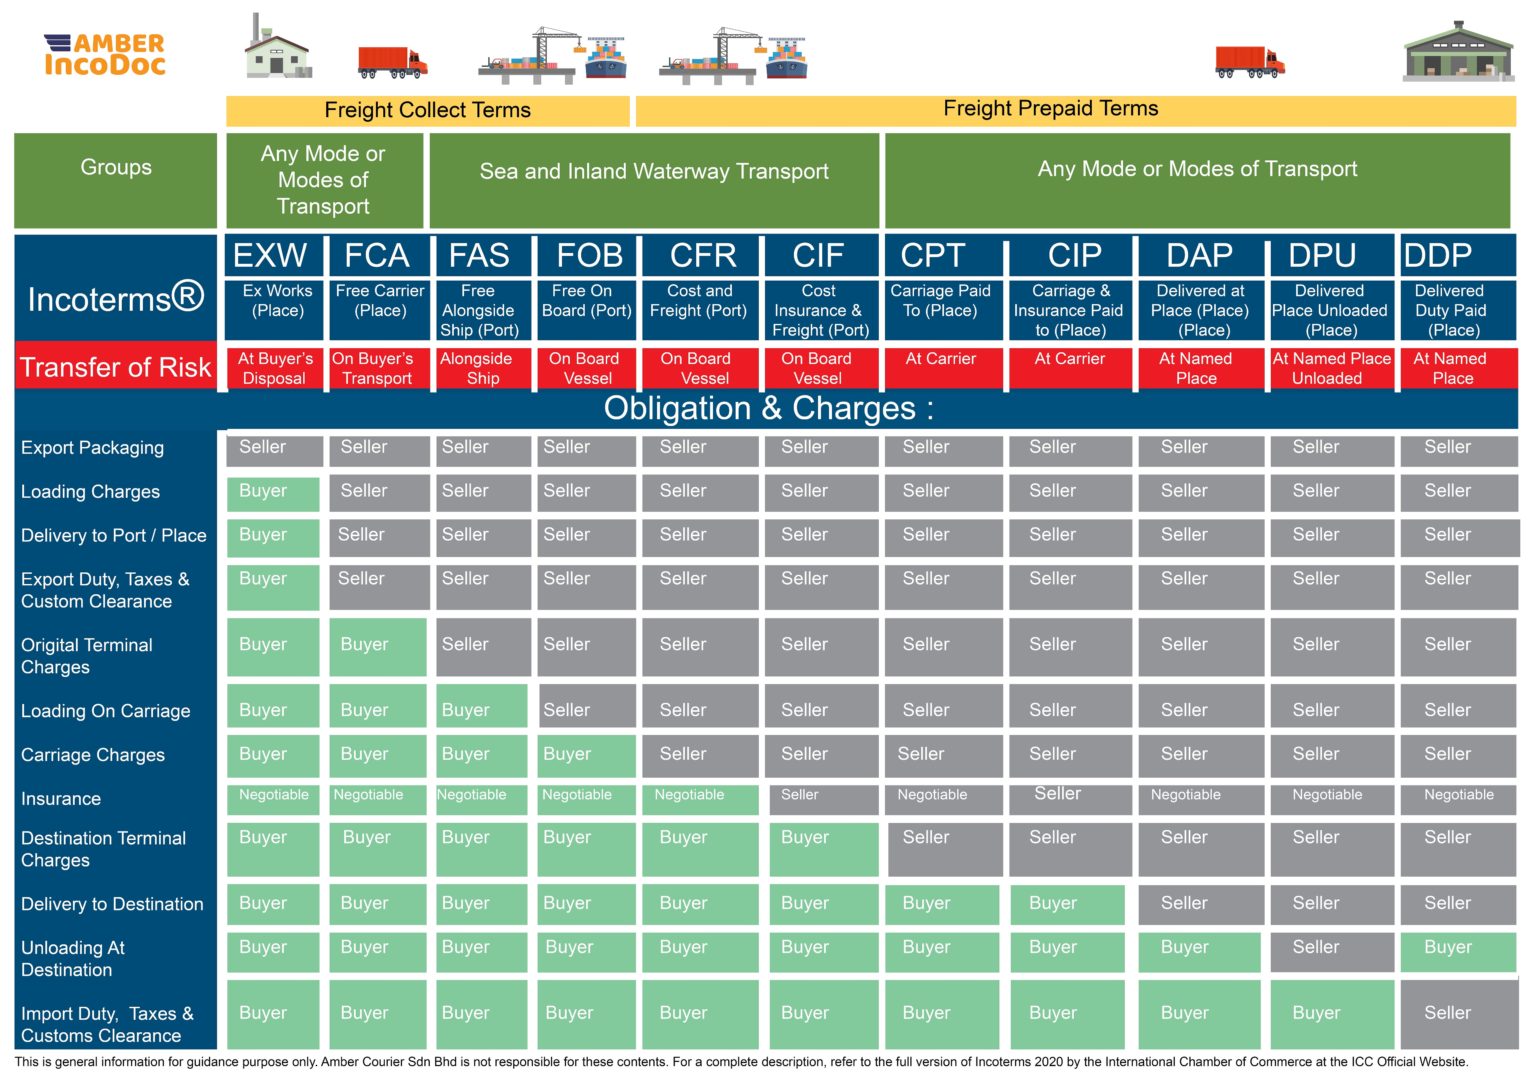 Fca Incoterms 2020 Chart Fca Free Carrier Incoterms 2020 Rule Updated 3690